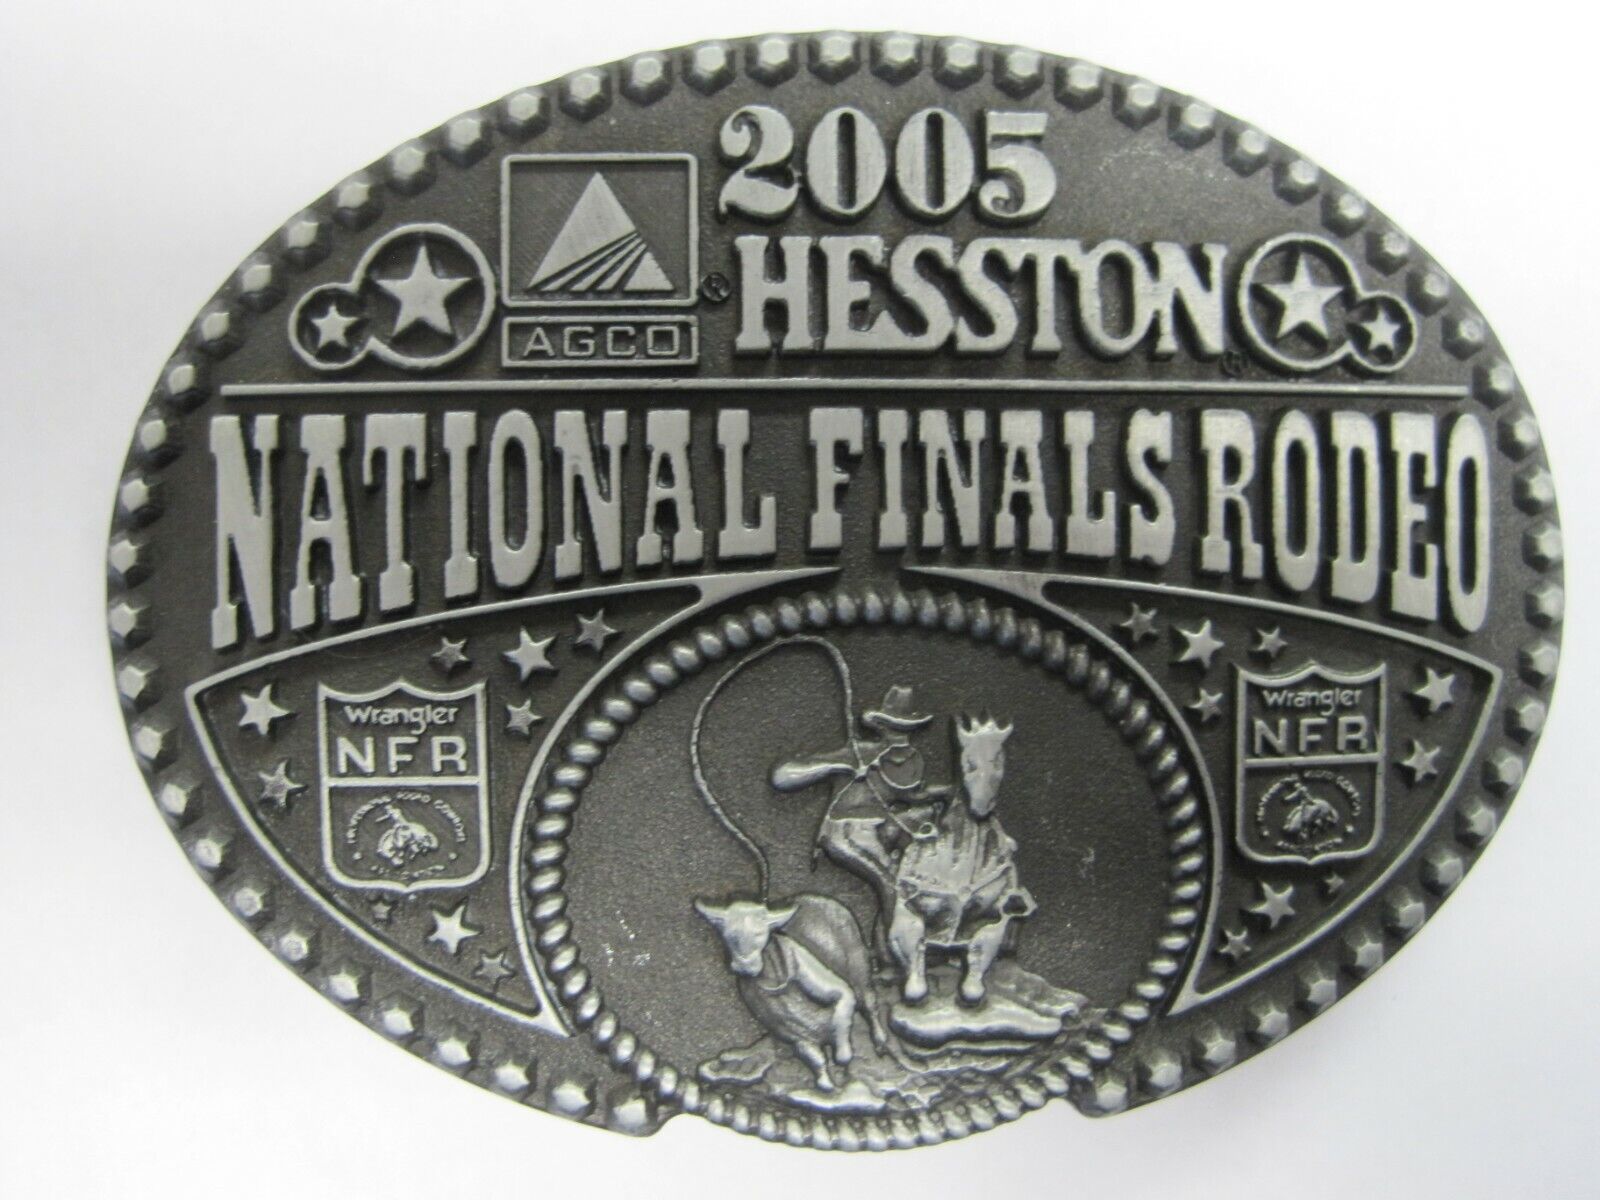  National Finals Rodeo Hesston 2005 NFR Adult Cowboy Buckle Wrangler New 